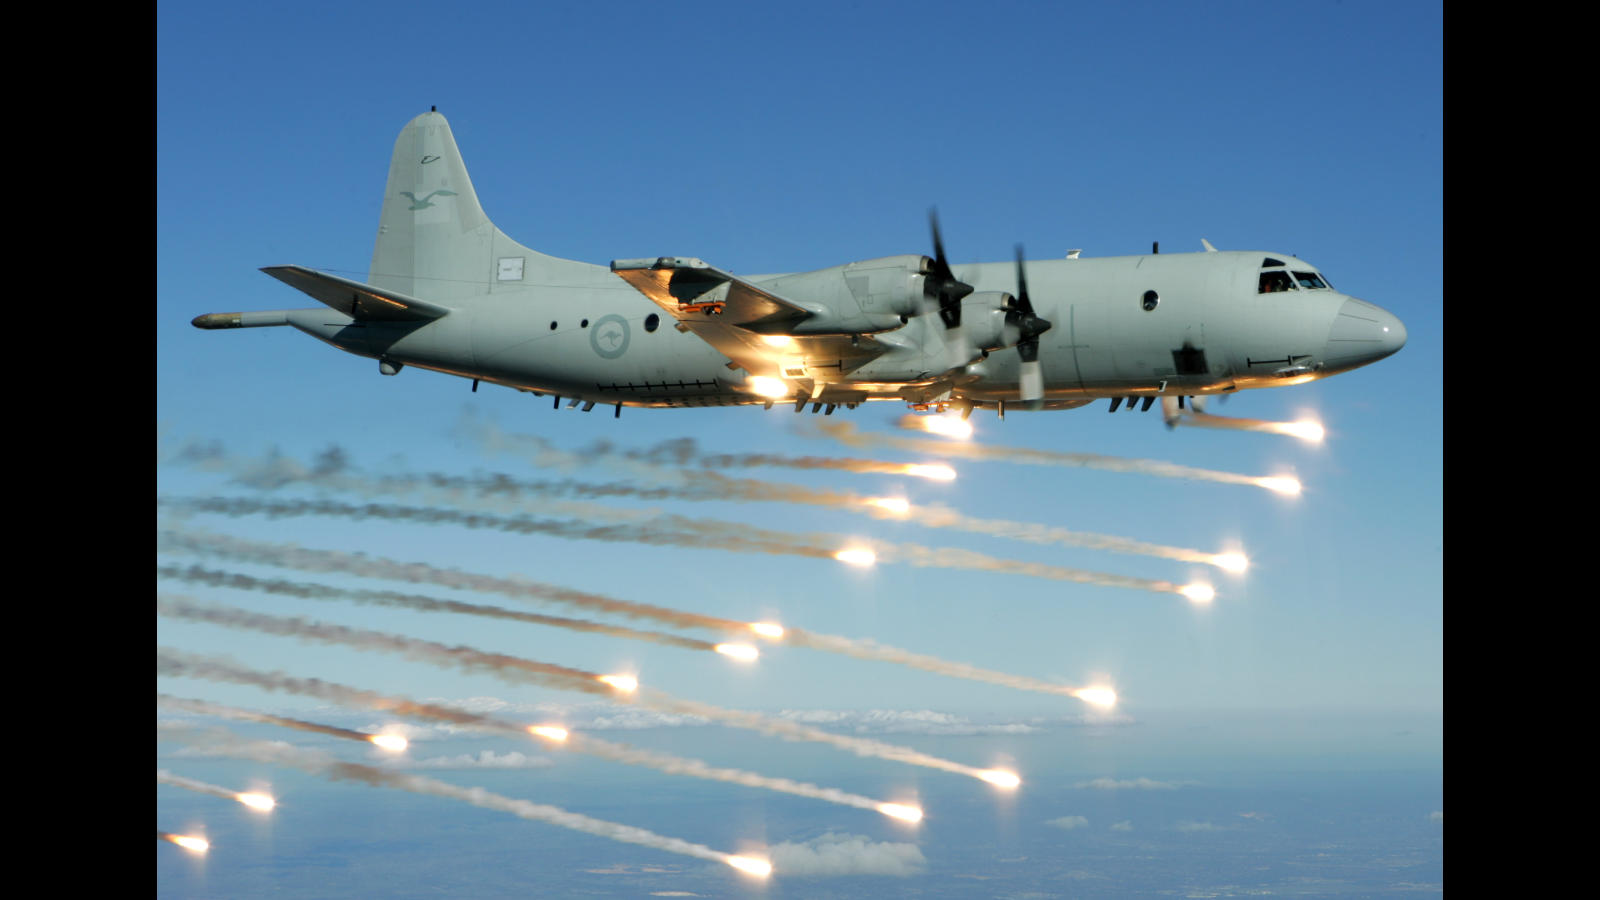 Royal Australian Air Force (RAAF) AP-3C Orion, of 92 Wing, jettisons flares during a trial of electronic warfare self-protection systems by the Aircraft Research and Development Unit (ARDU) based at RAAF Base Edinburgh, South Australia.